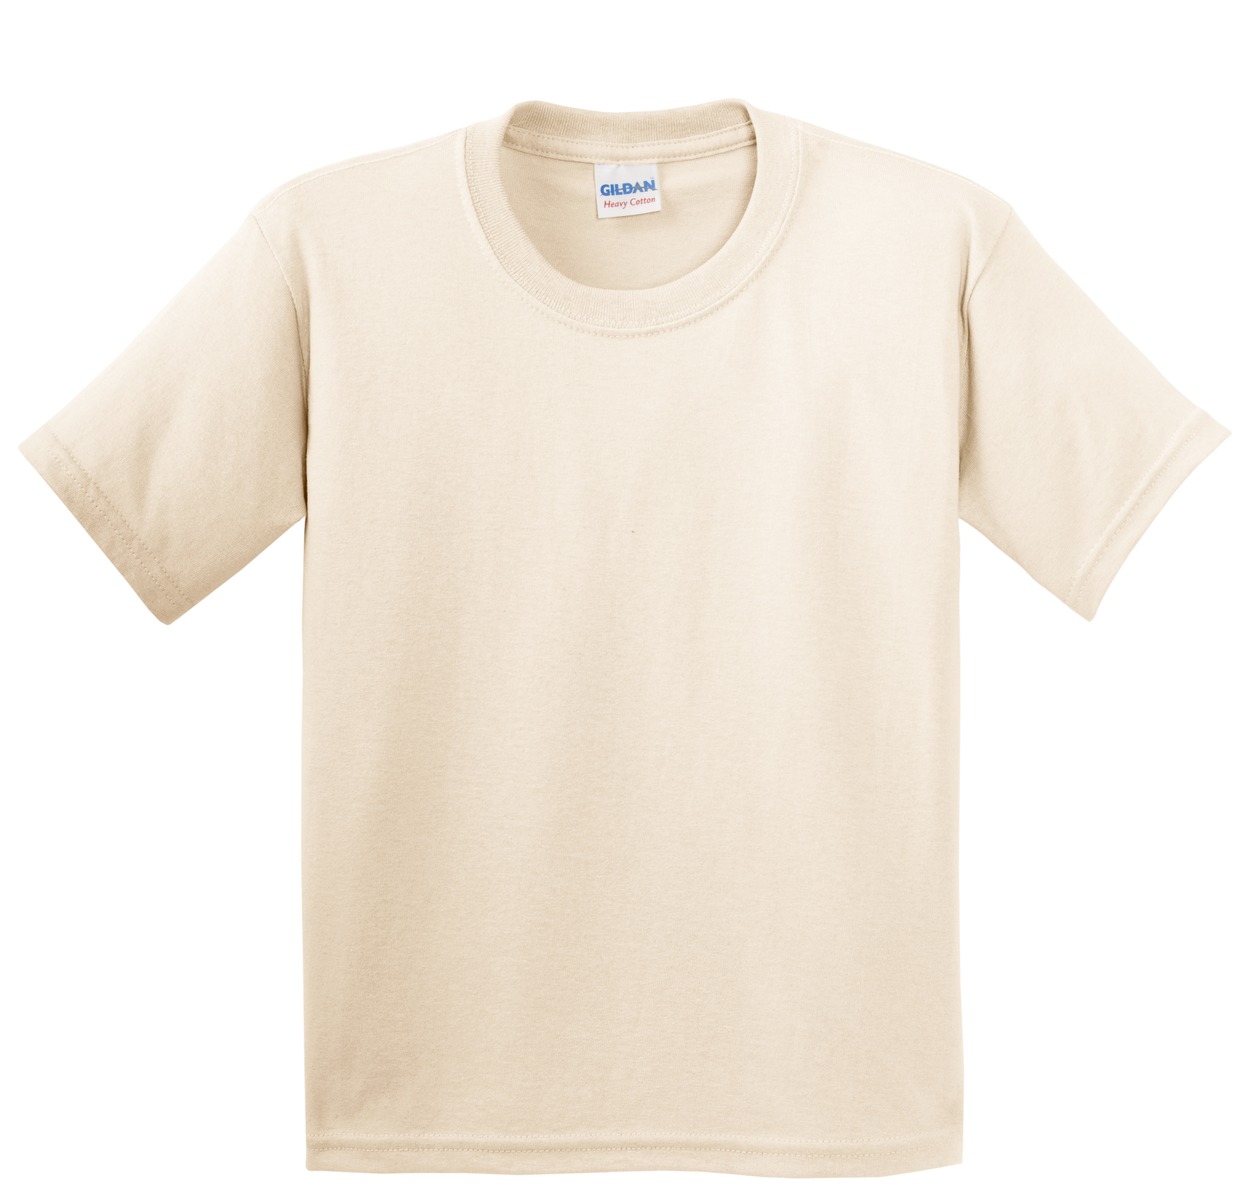 Is there a size chart for this shirt?